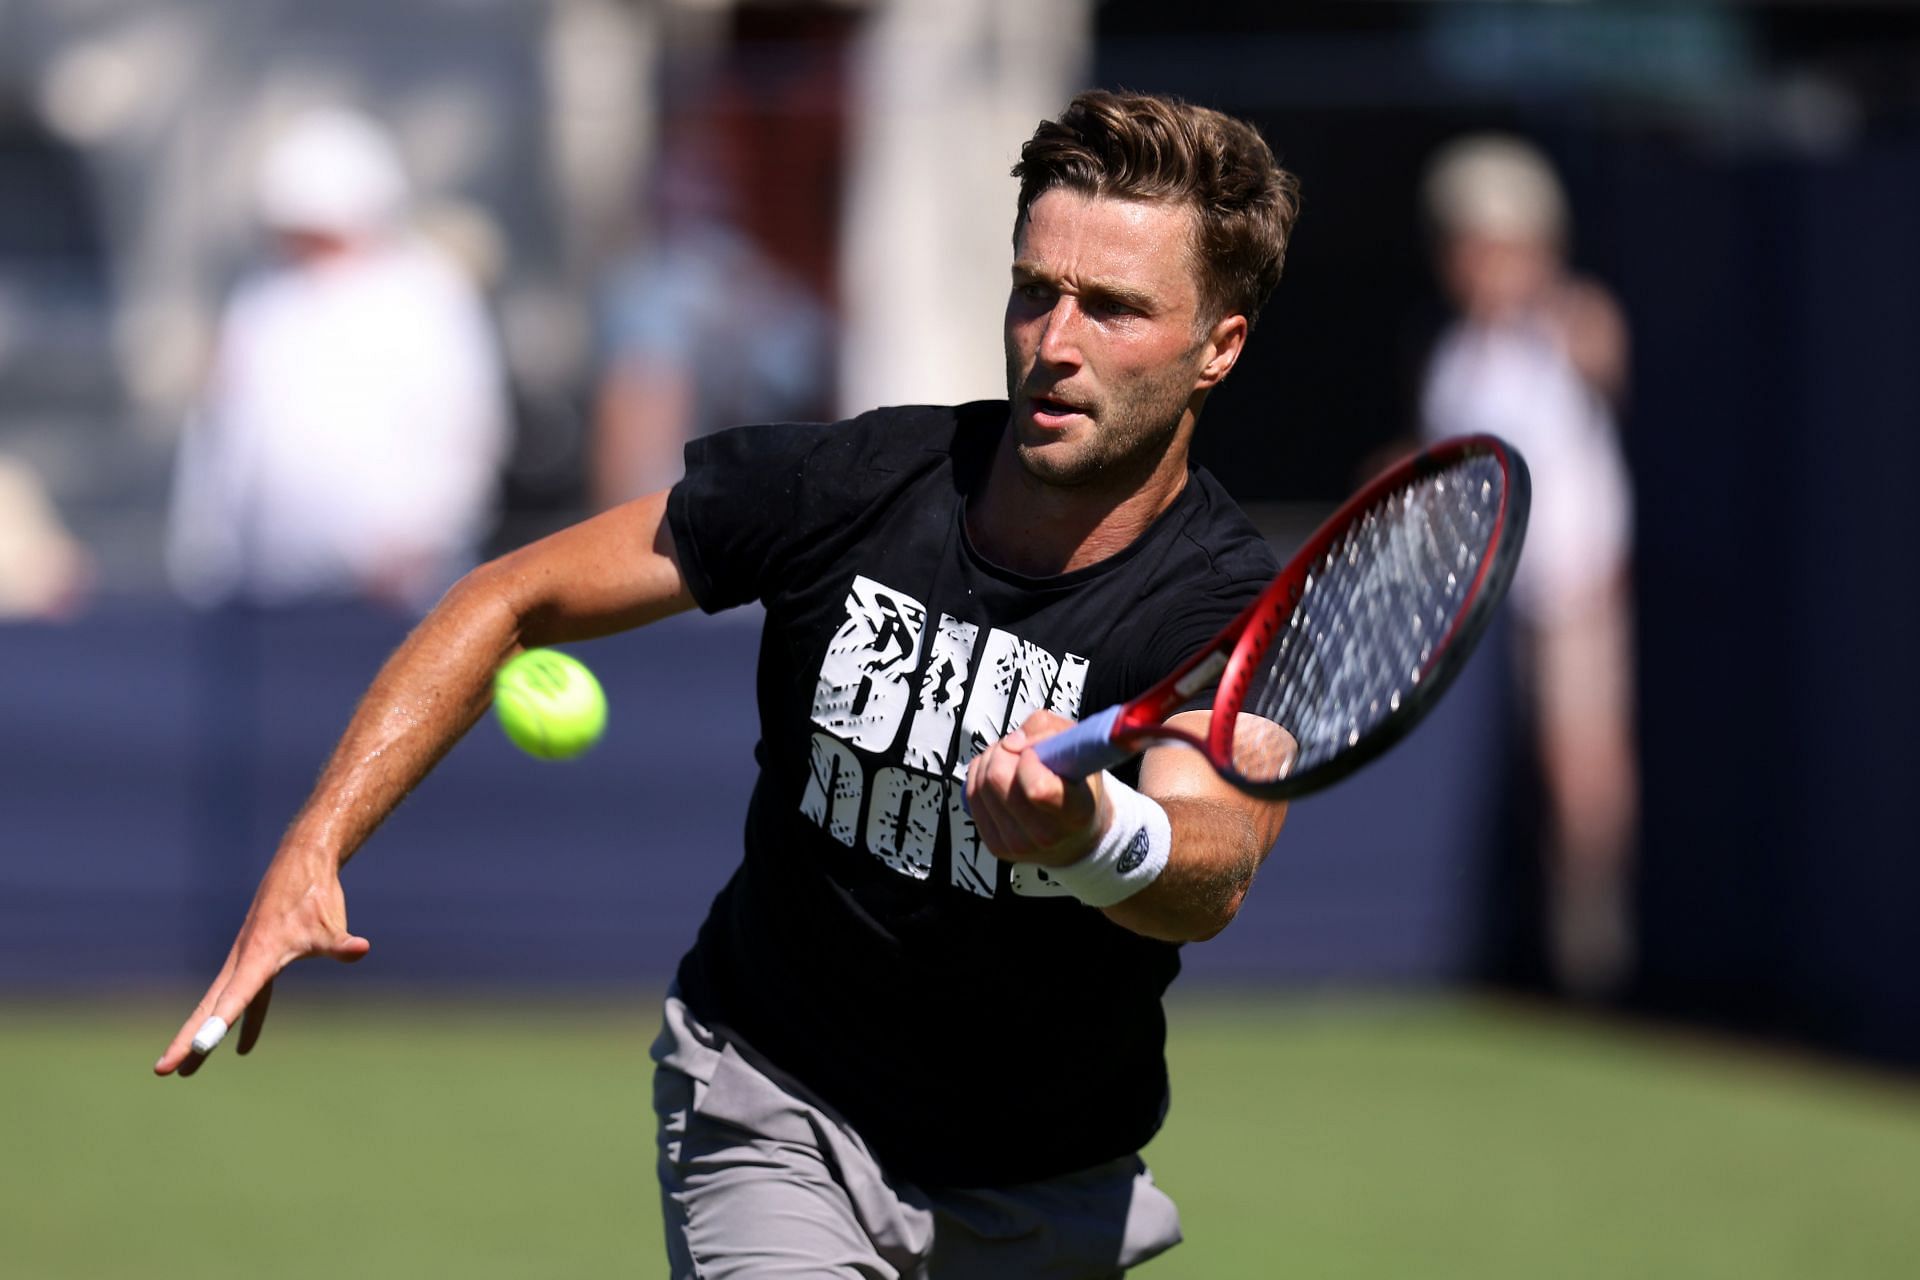 Liam Broady practices ahead of the Rothesay International in Eastbourne